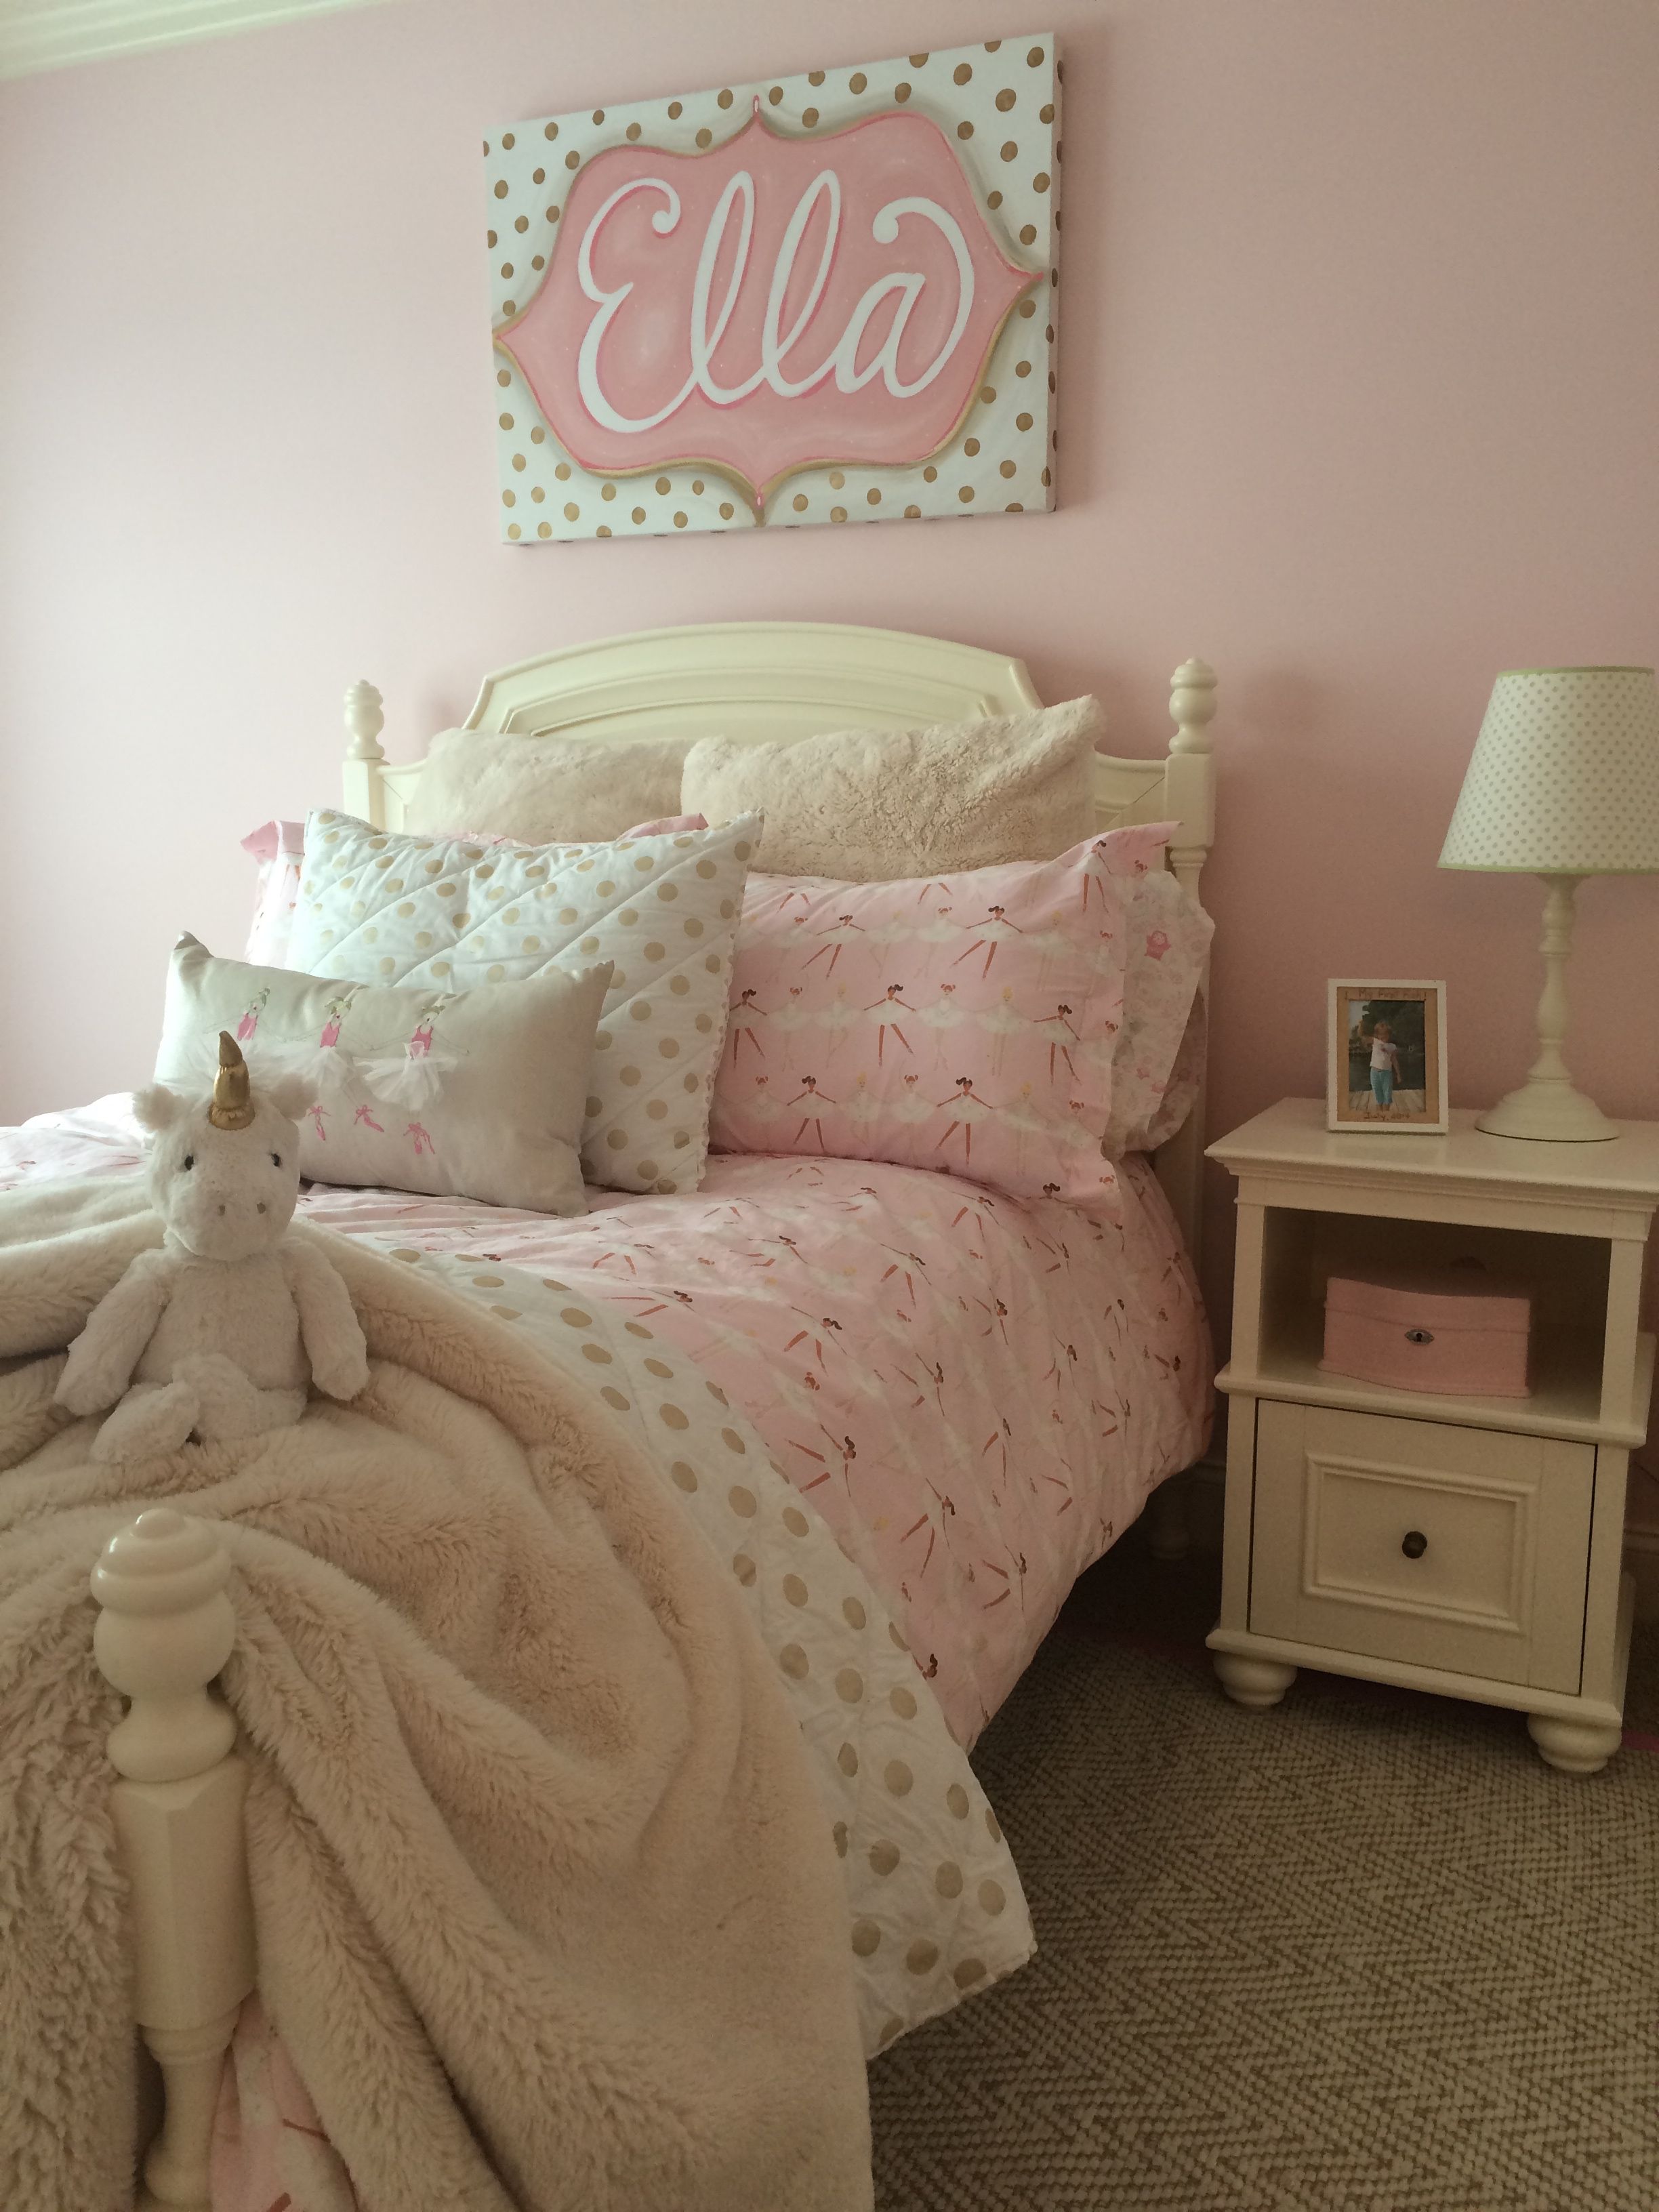 girly wallpapers for bedrooms,bedroom,bedding,bed sheet,bed,furniture